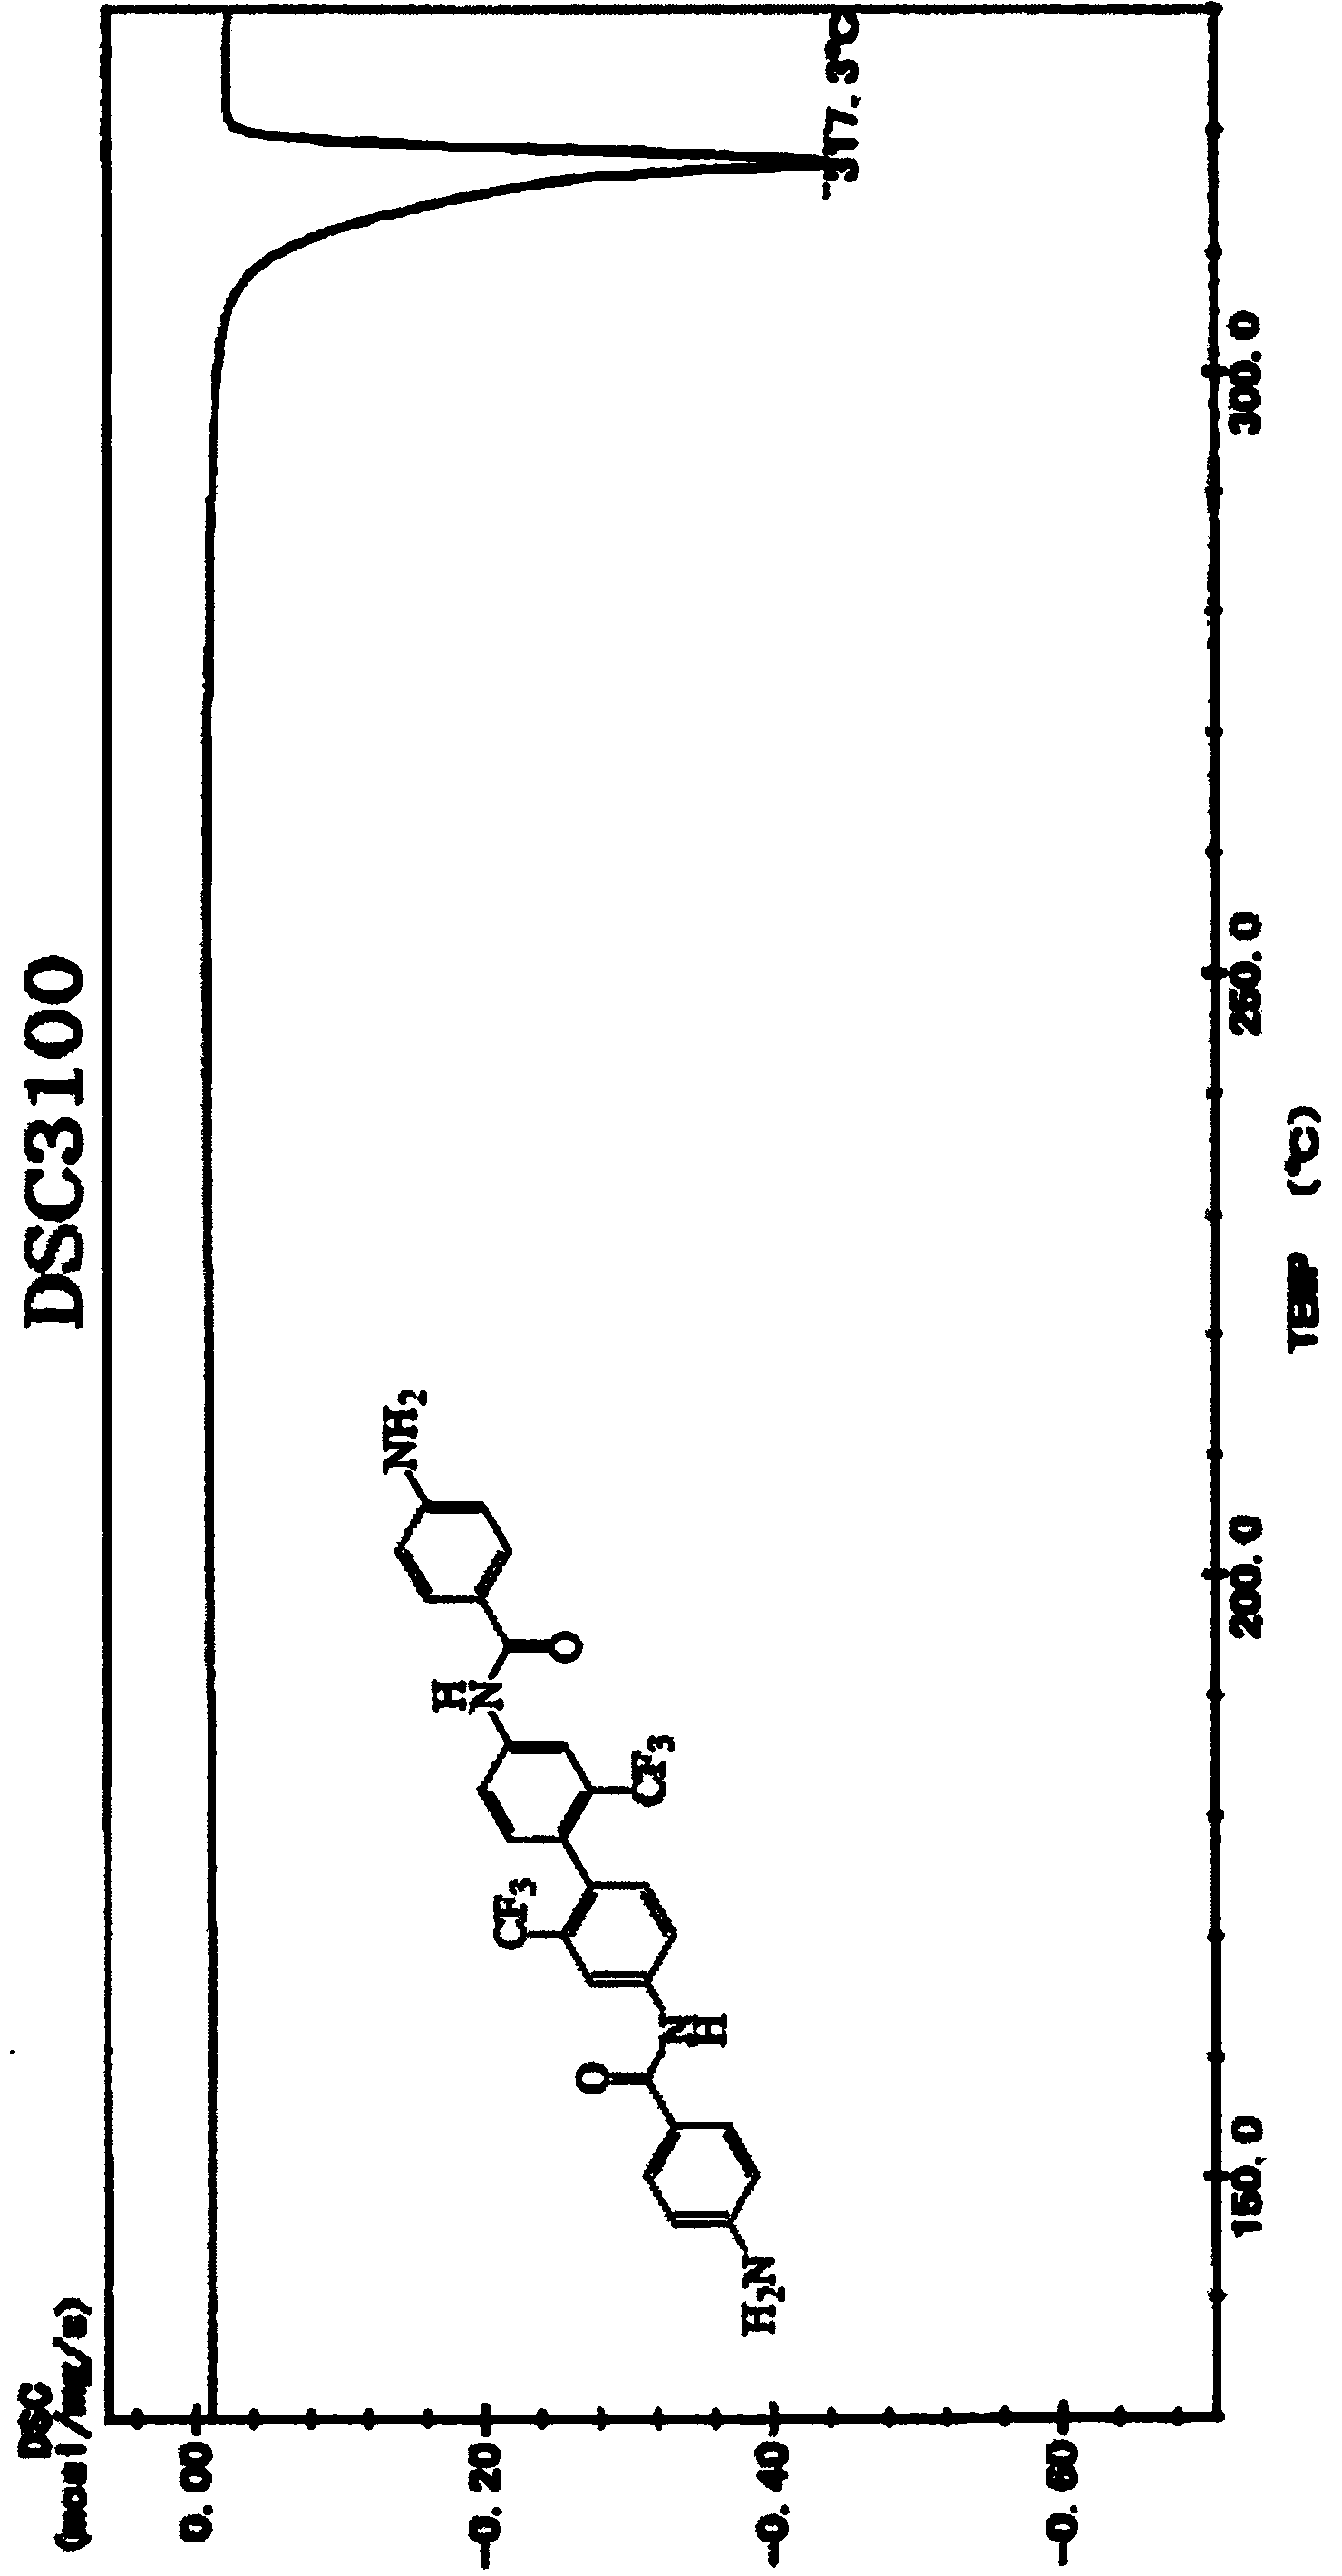 Diamine, polyimide, and polyimide film and utilization thereof